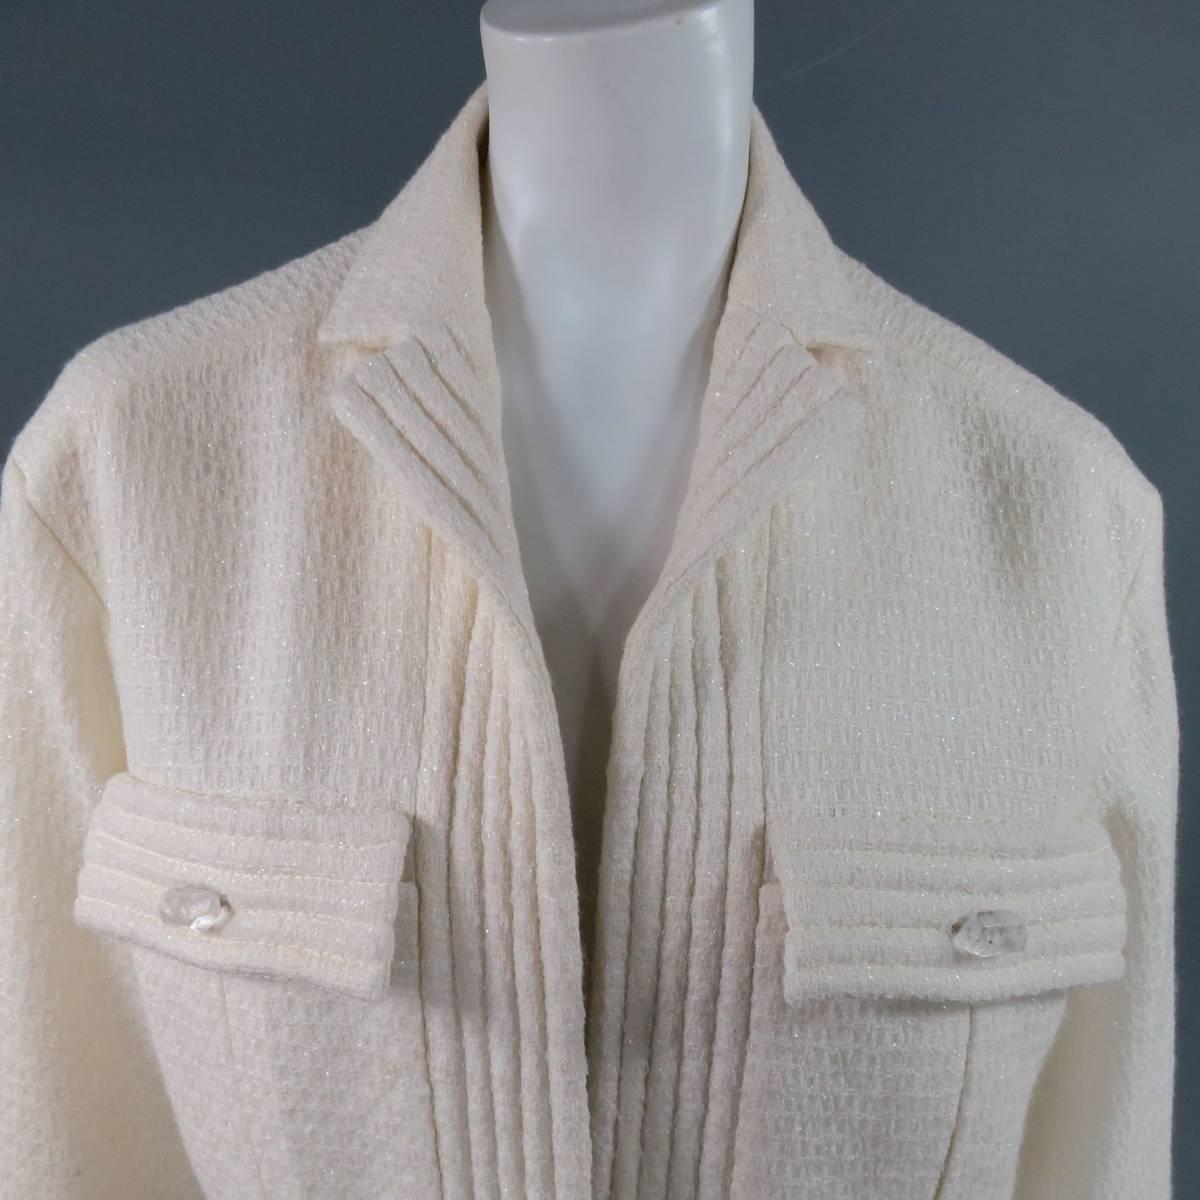 This fabulous oversized CHANEL jacket comes in a sparkley textured cream wool blend material and features a small collar lapel, open front, double patch flap pockets with clear crystal buttons, three quarter sleeves with ribbed stripe cuff, and